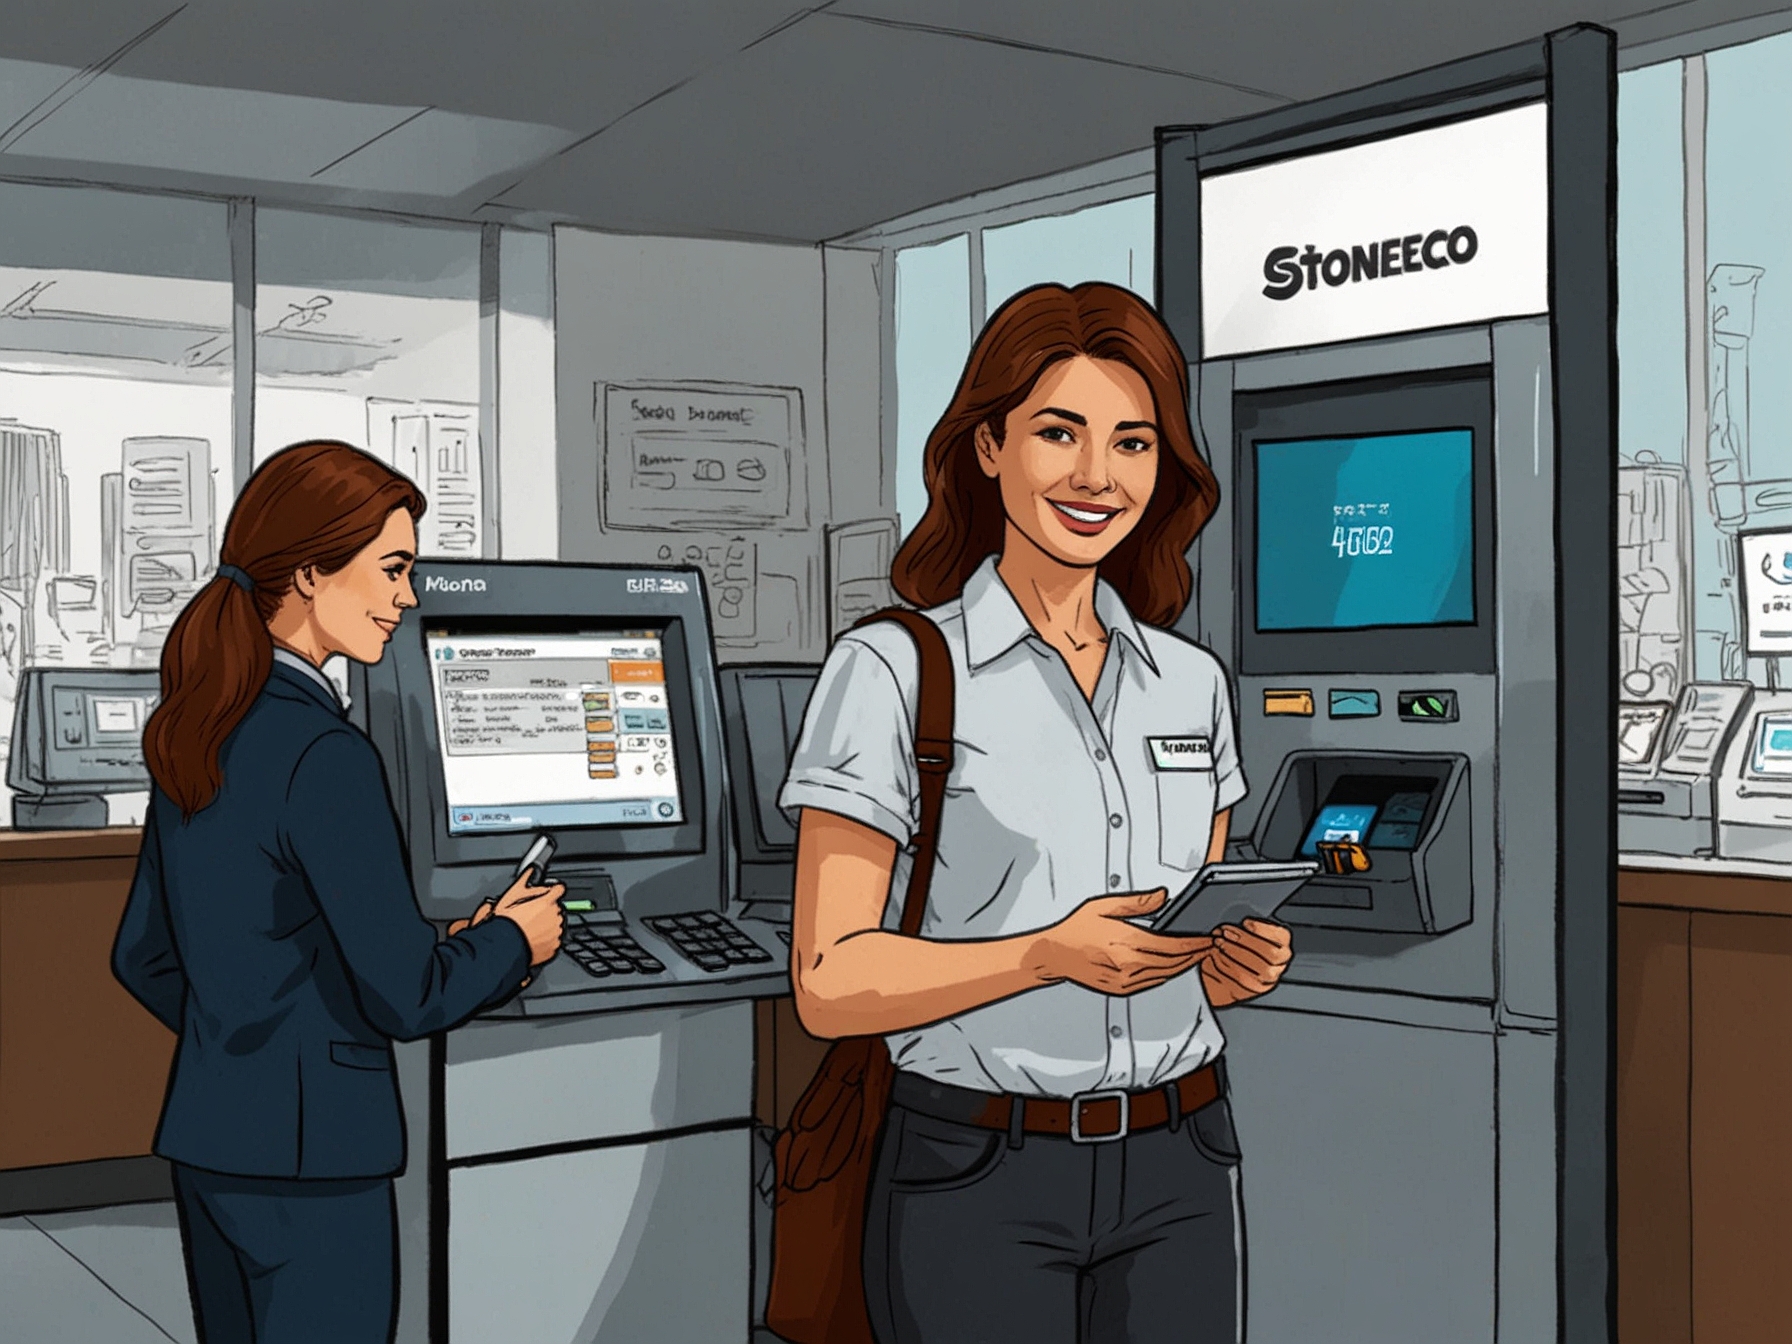 Illustration of StoneCo's digital payment systems being used by small and medium-sized enterprises, showcasing the company's role in modernizing payment processes.